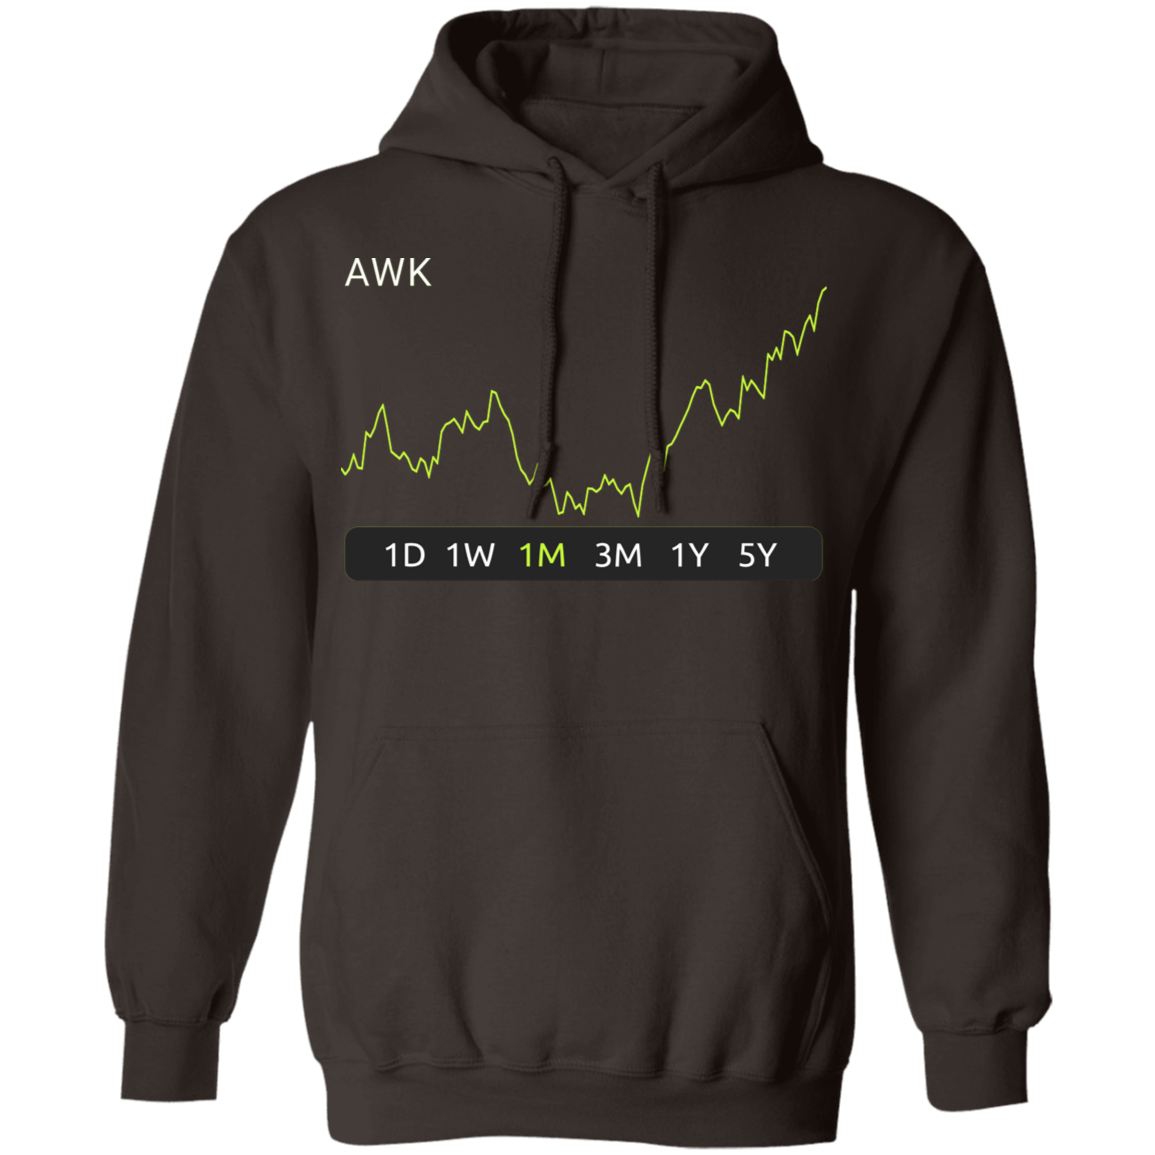 AWK Stock 1m Pullover Hoodie